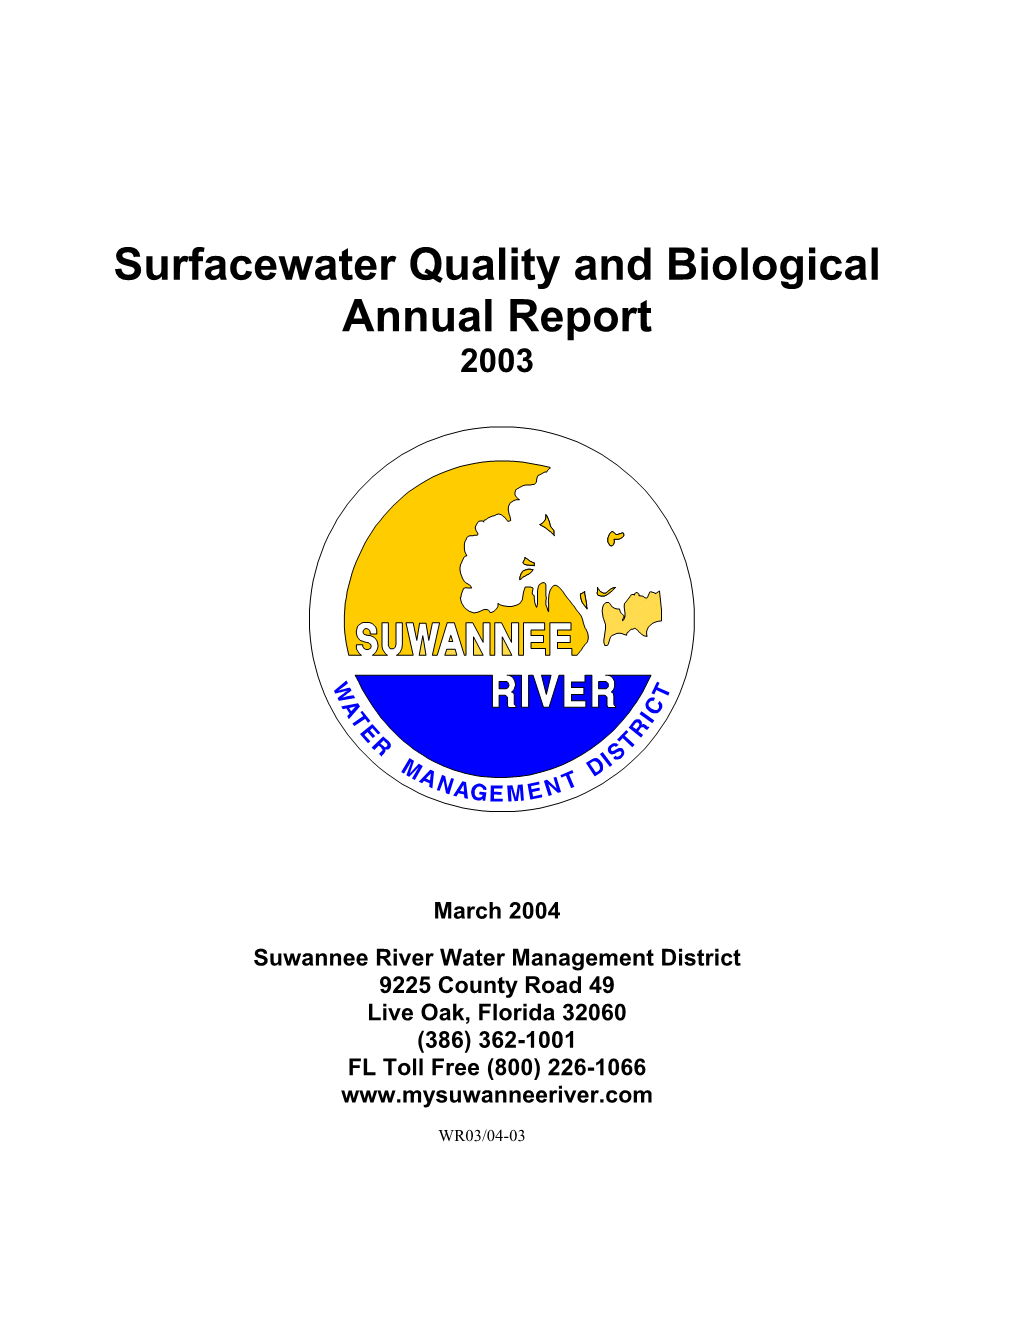 Surface Water Quality and Biological Report 2003